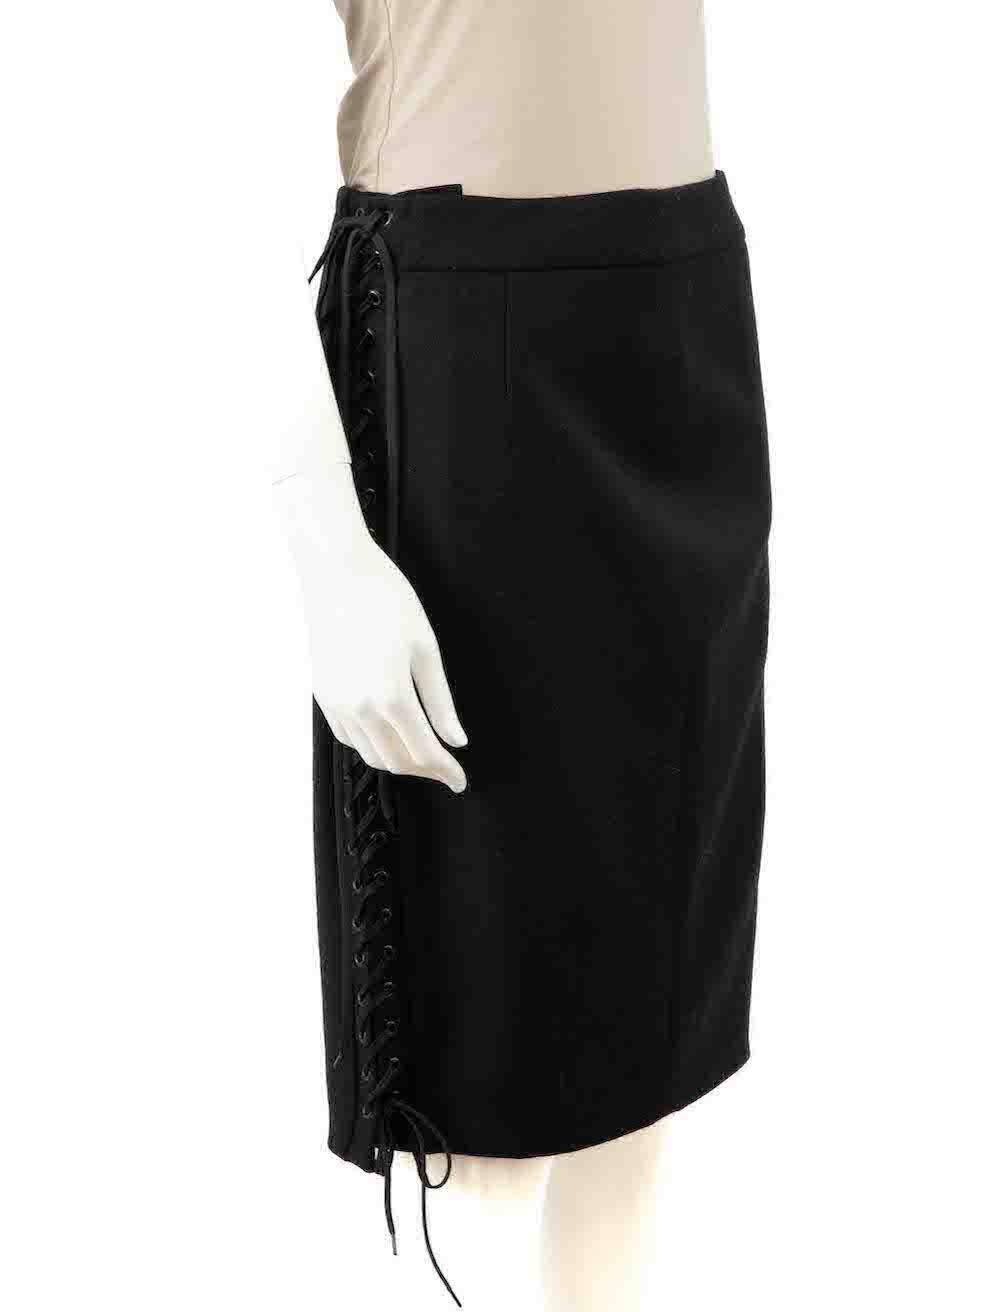 CONDITION is Very good. Minimal wear to skirt is evident. Minimal wear to the rear waistband with a small pluck to the weave on this used Anne Fontaine designer resale item.
 
 Details
 Black
 Wool
 Pencil skirt
 Figure hugging fit
 Back lace up